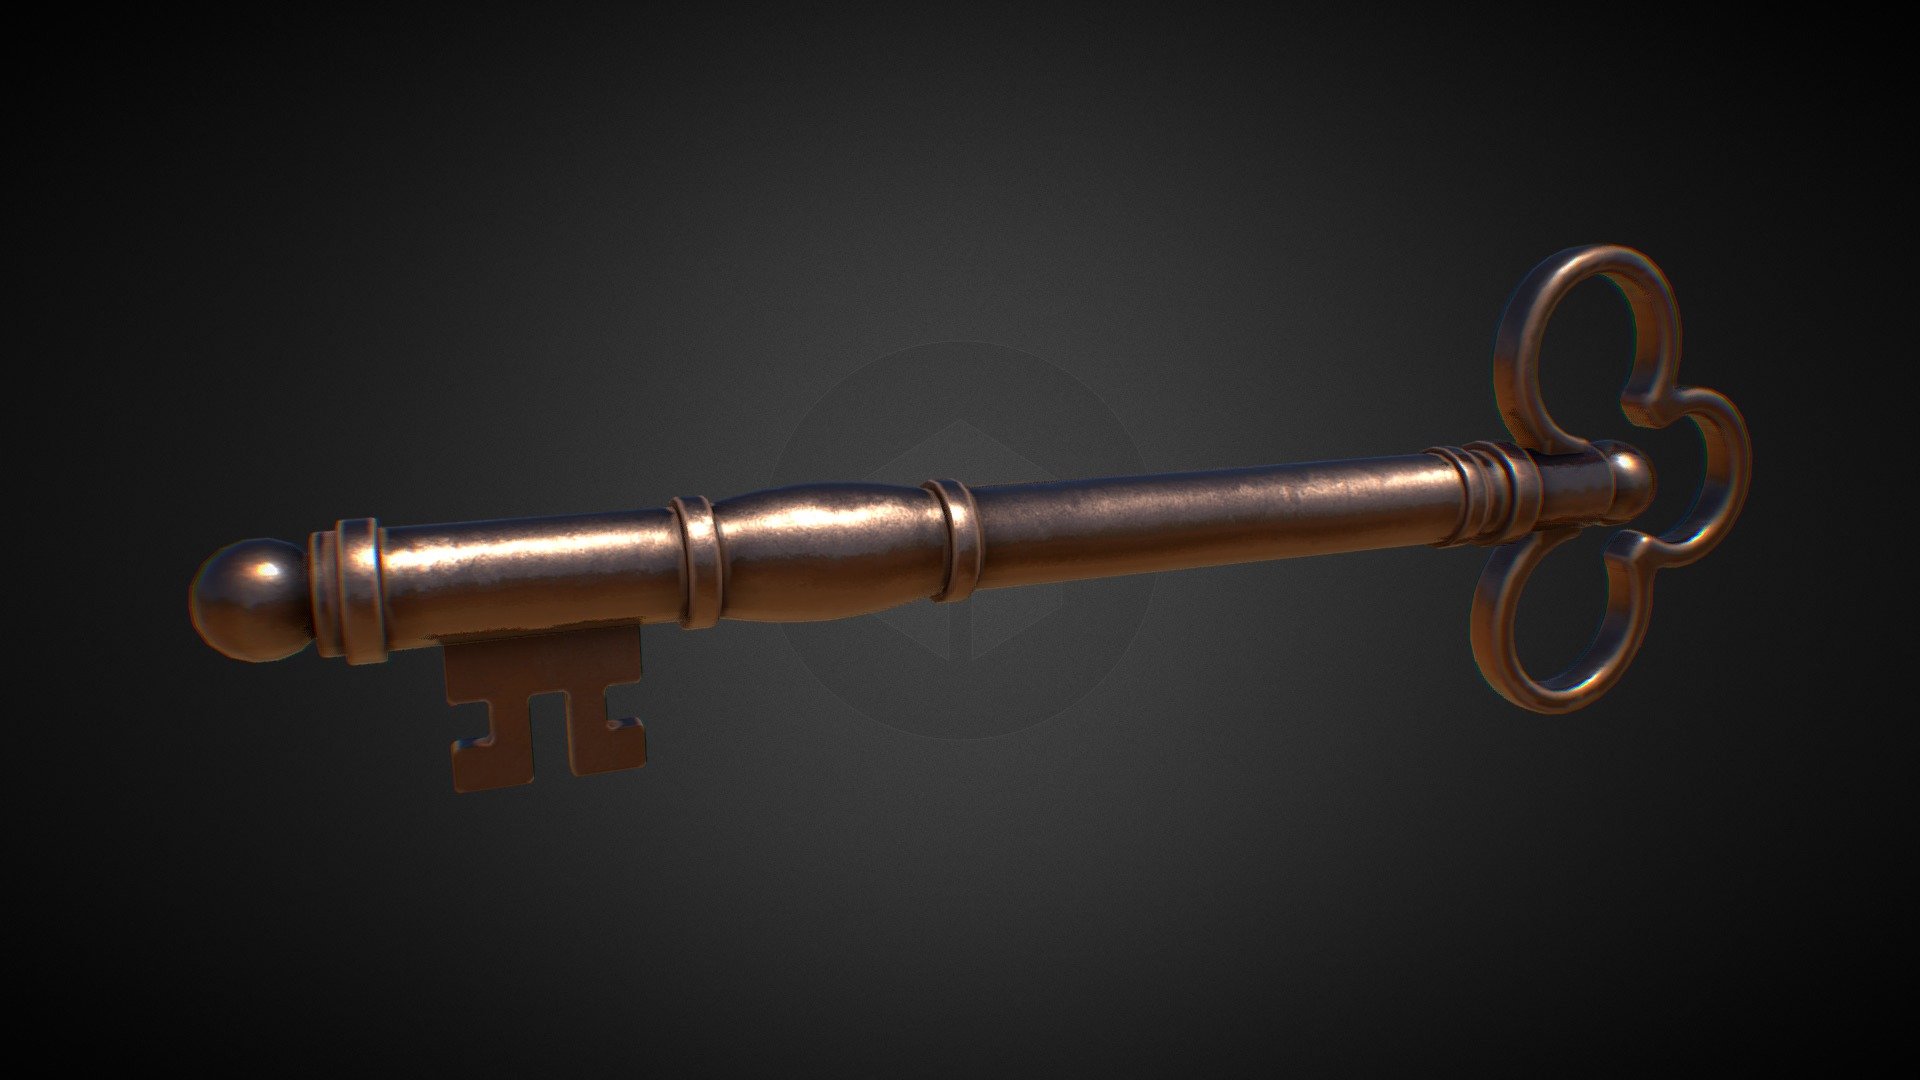 High poly bronze key.

Made with 3dsMax and Substance Painter 3d model